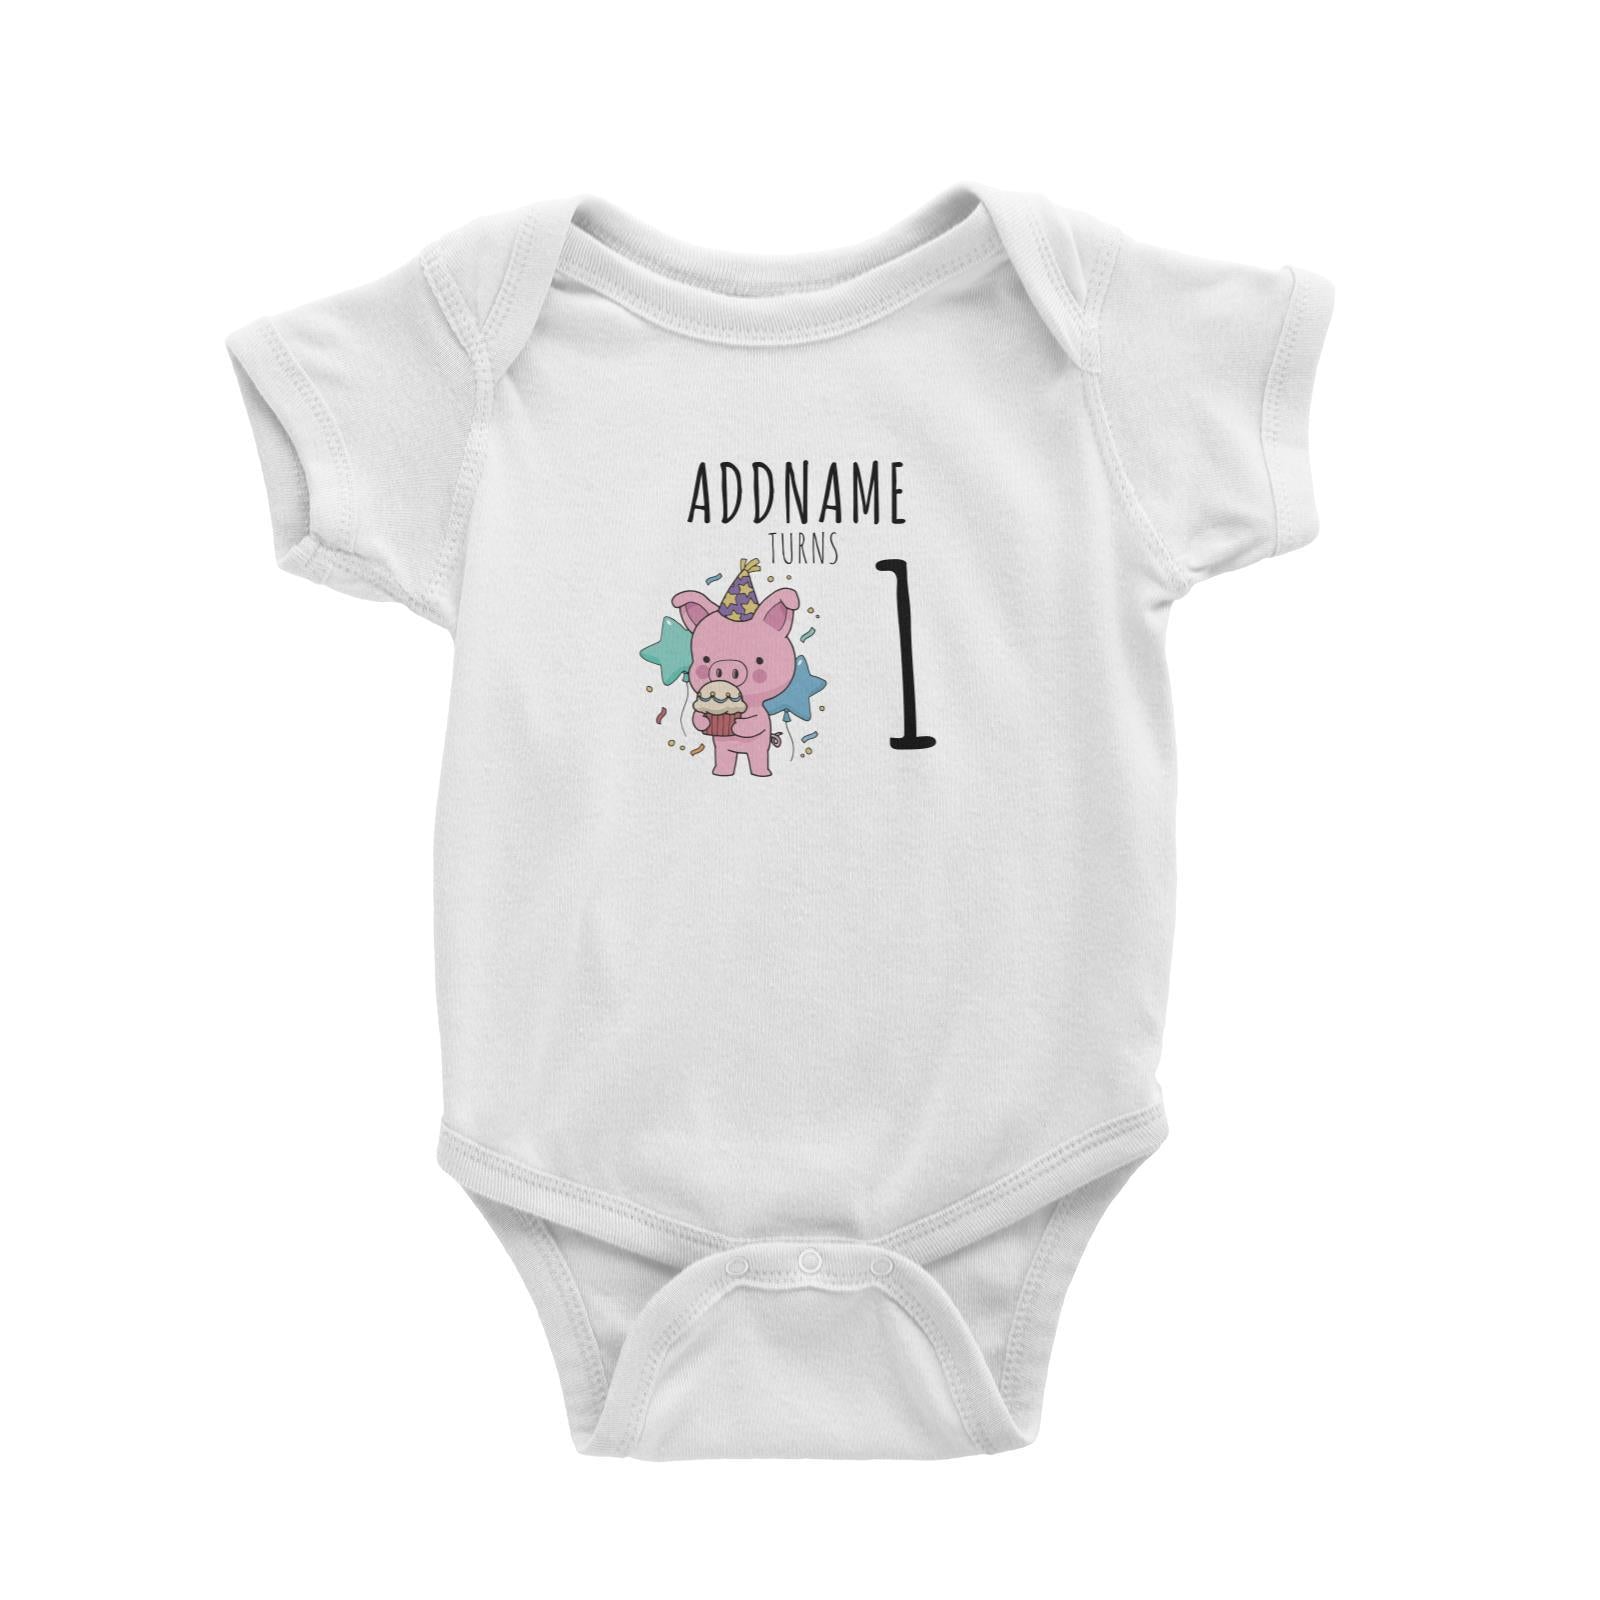 Birthday Sketch Animals Pig with Party Hat Eating Cupcake Addname Turns 1 Baby Romper